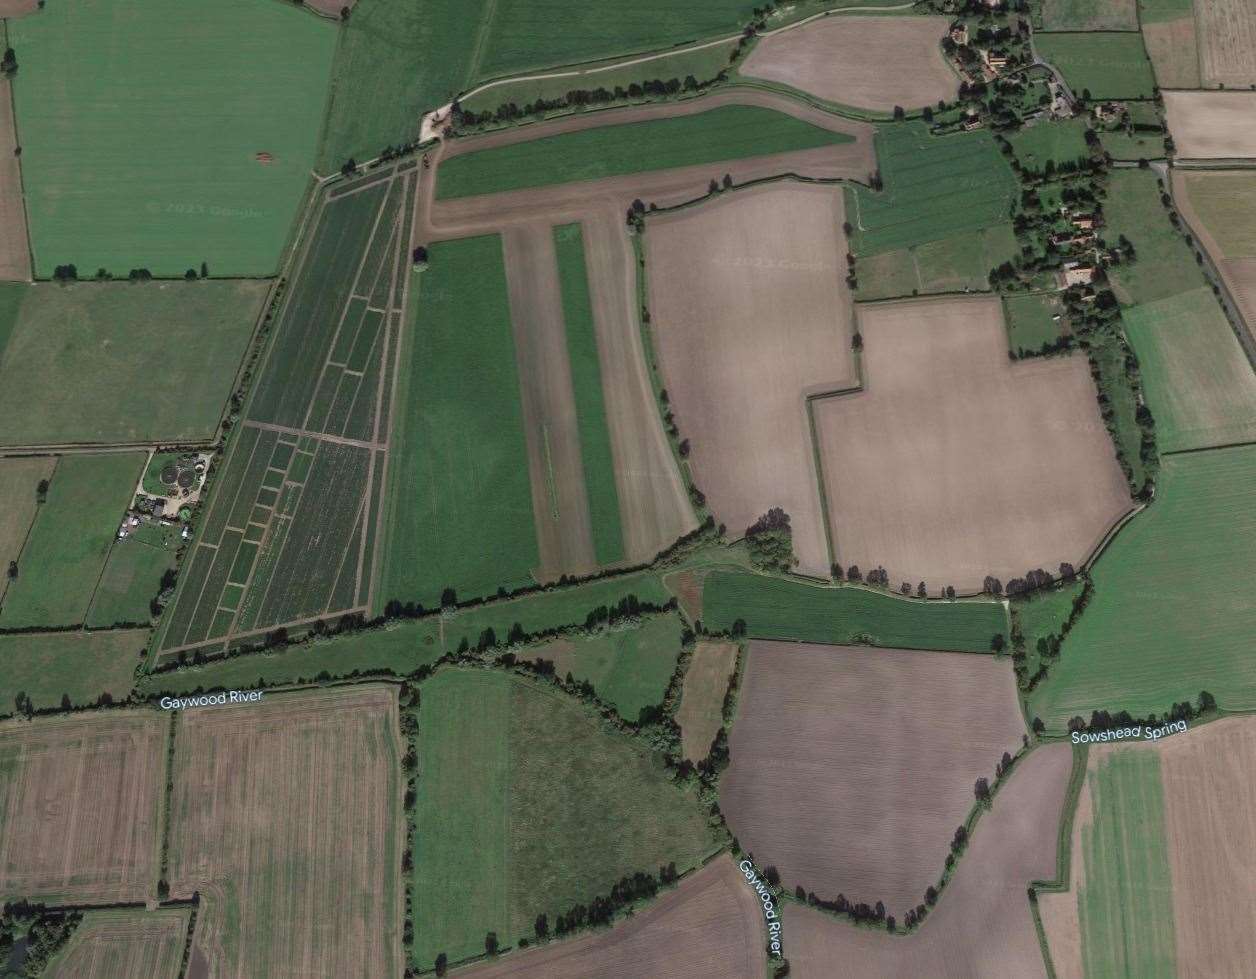 An aerial view of the Gaywood River. Picture: Google Maps